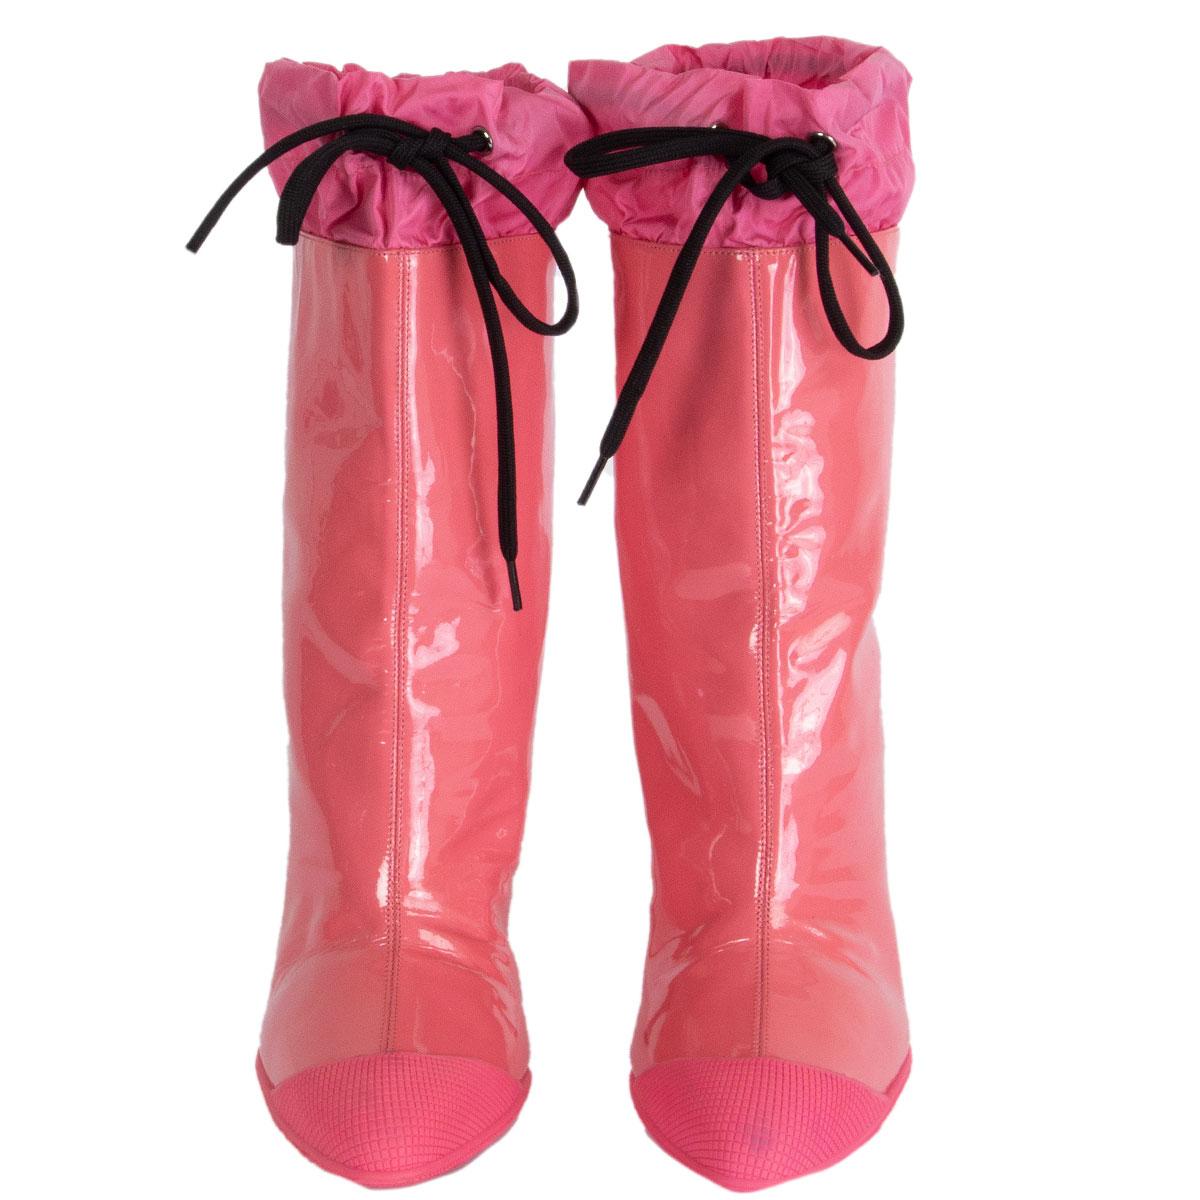 100% authentic Miu Miu rain-boots in bubble gum patent leather with rubber sole and waterproof top detail with drawstring laces. Cap toe. Brand new. 

Imprinted Size	36
Shoe Size	36
Inside Sole	23cm (9in)
Width	7cm (2.7in)
Heel	9cm